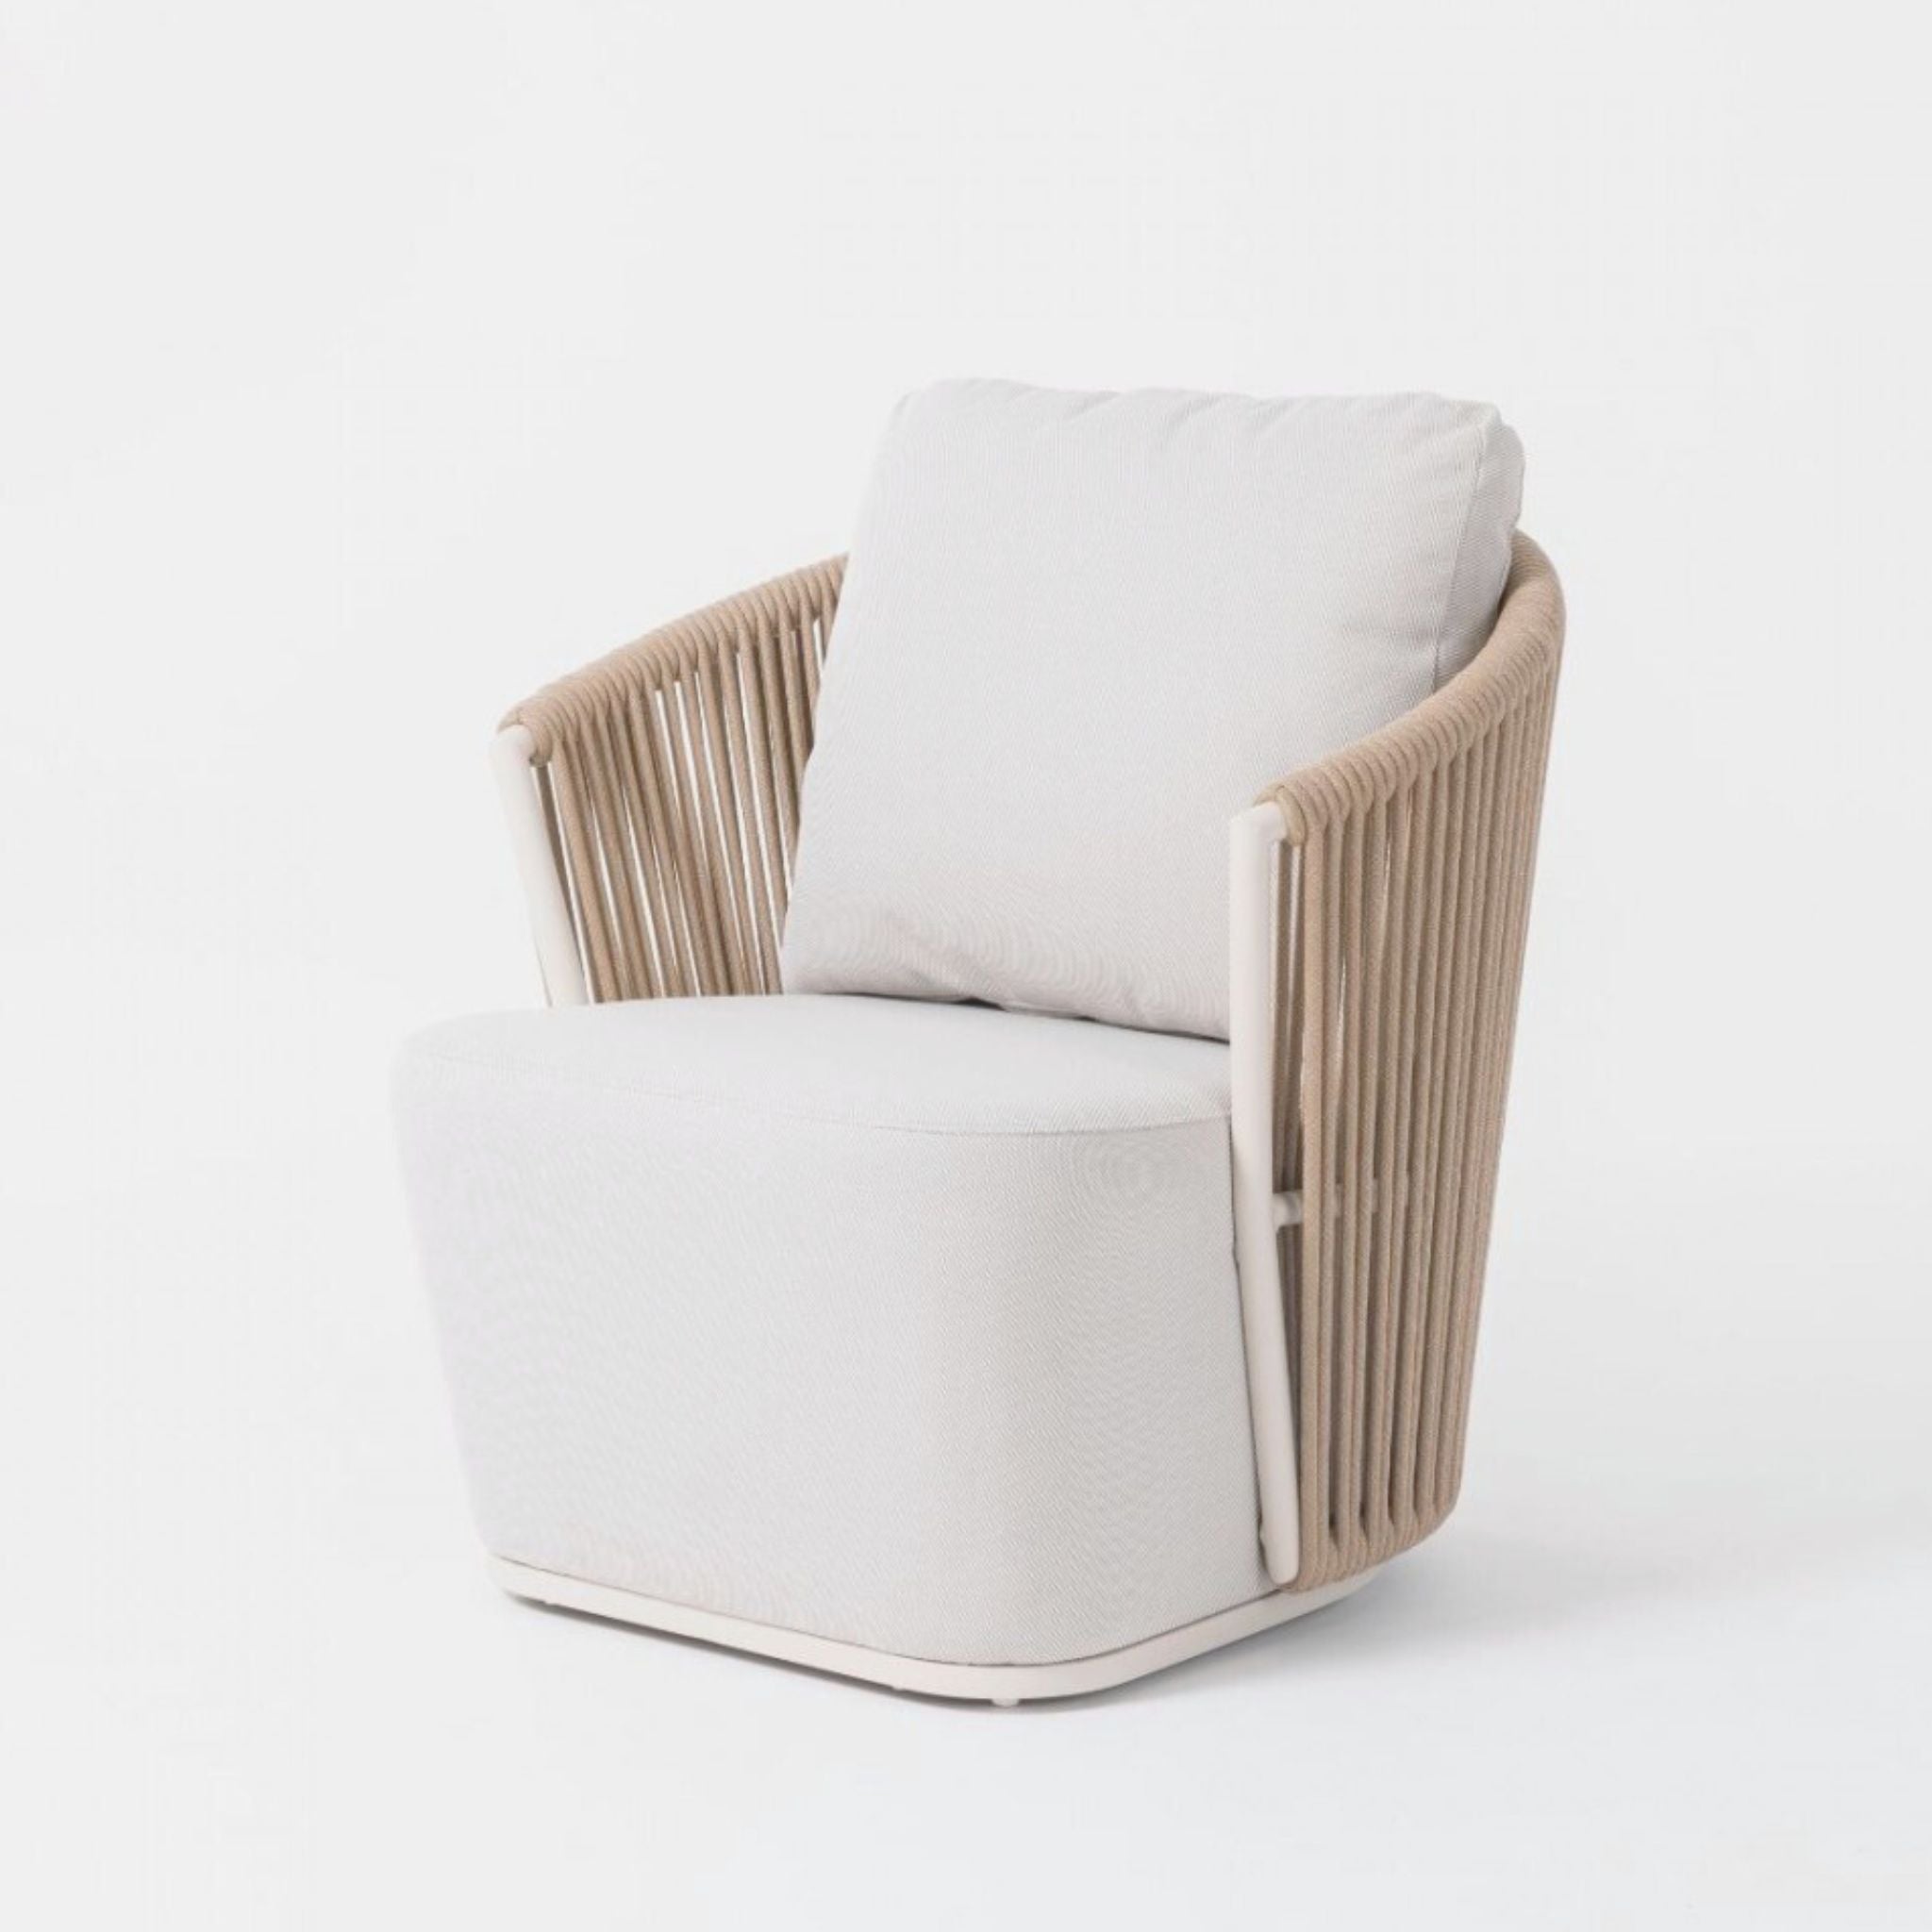 Crisal Decoracion Elba Armchair with Low Aluminum and Rope - ModernistaLiving